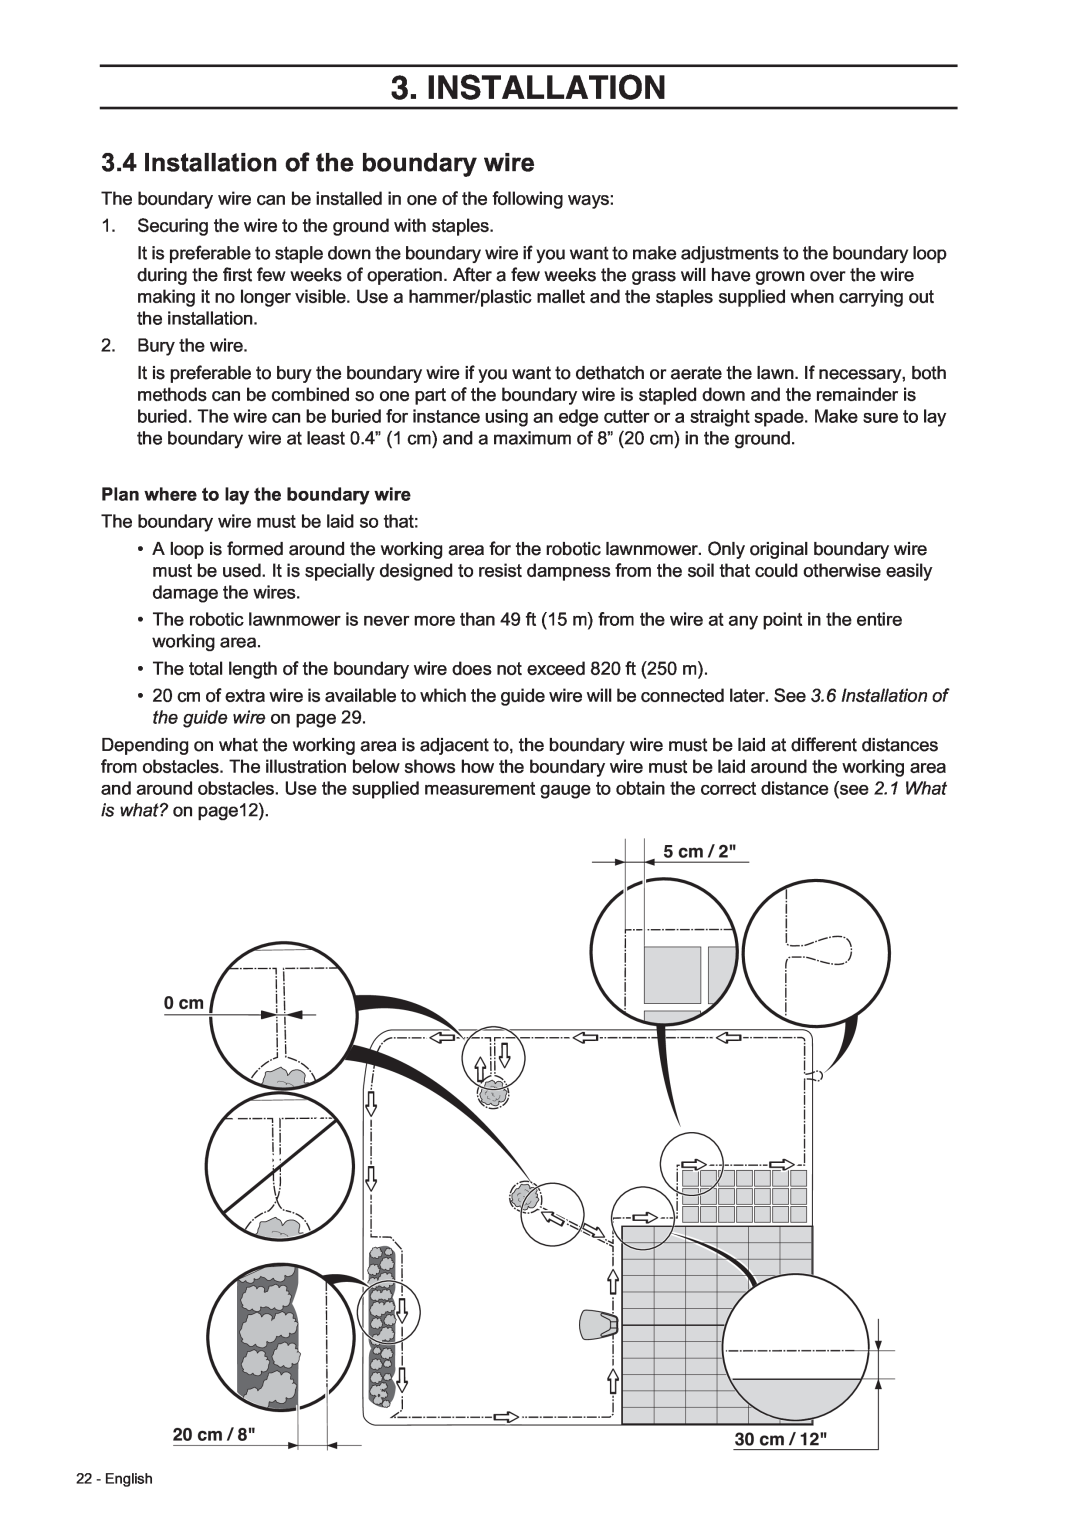 Husqvarna 308, 305 manual Installation of the boundary wire, Plan where to lay the boundary wire 